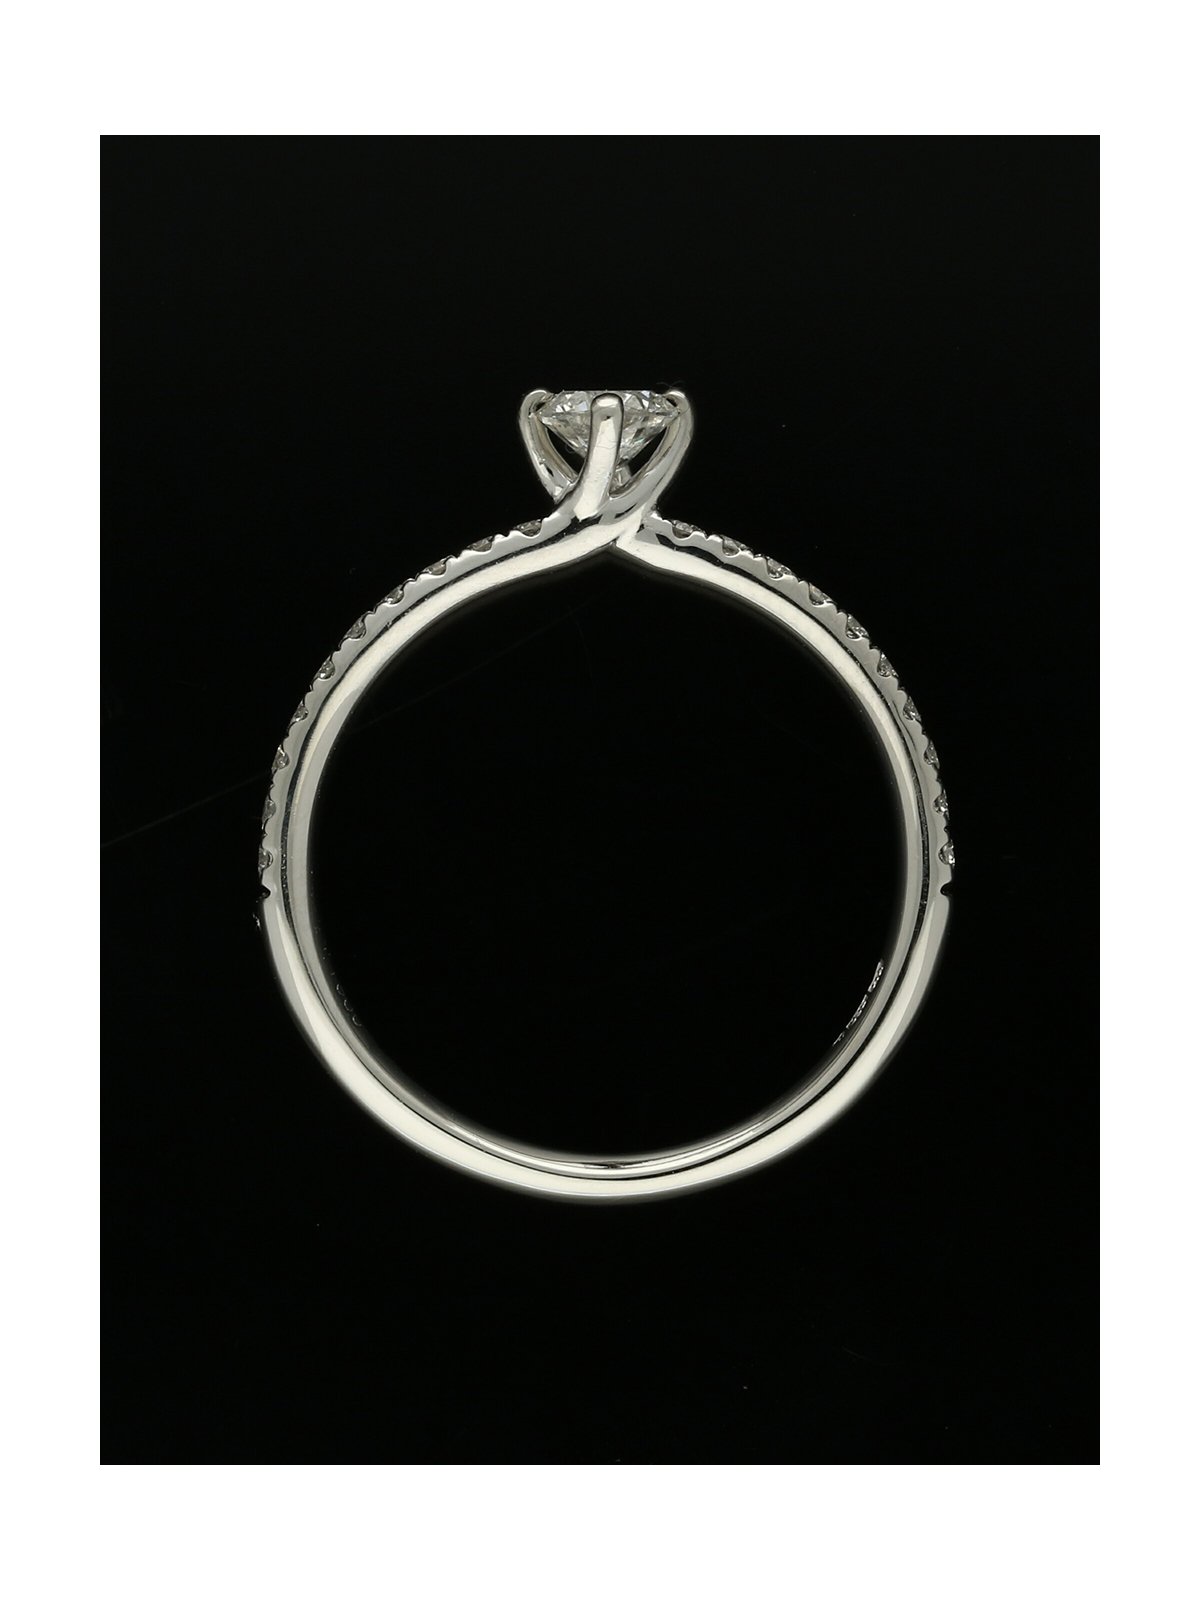 Diamond Solitaire Engagement Ring "The Adelaide Collection" 0.25ct Round Brilliant Cut in Platinum with Diamond Shoulders